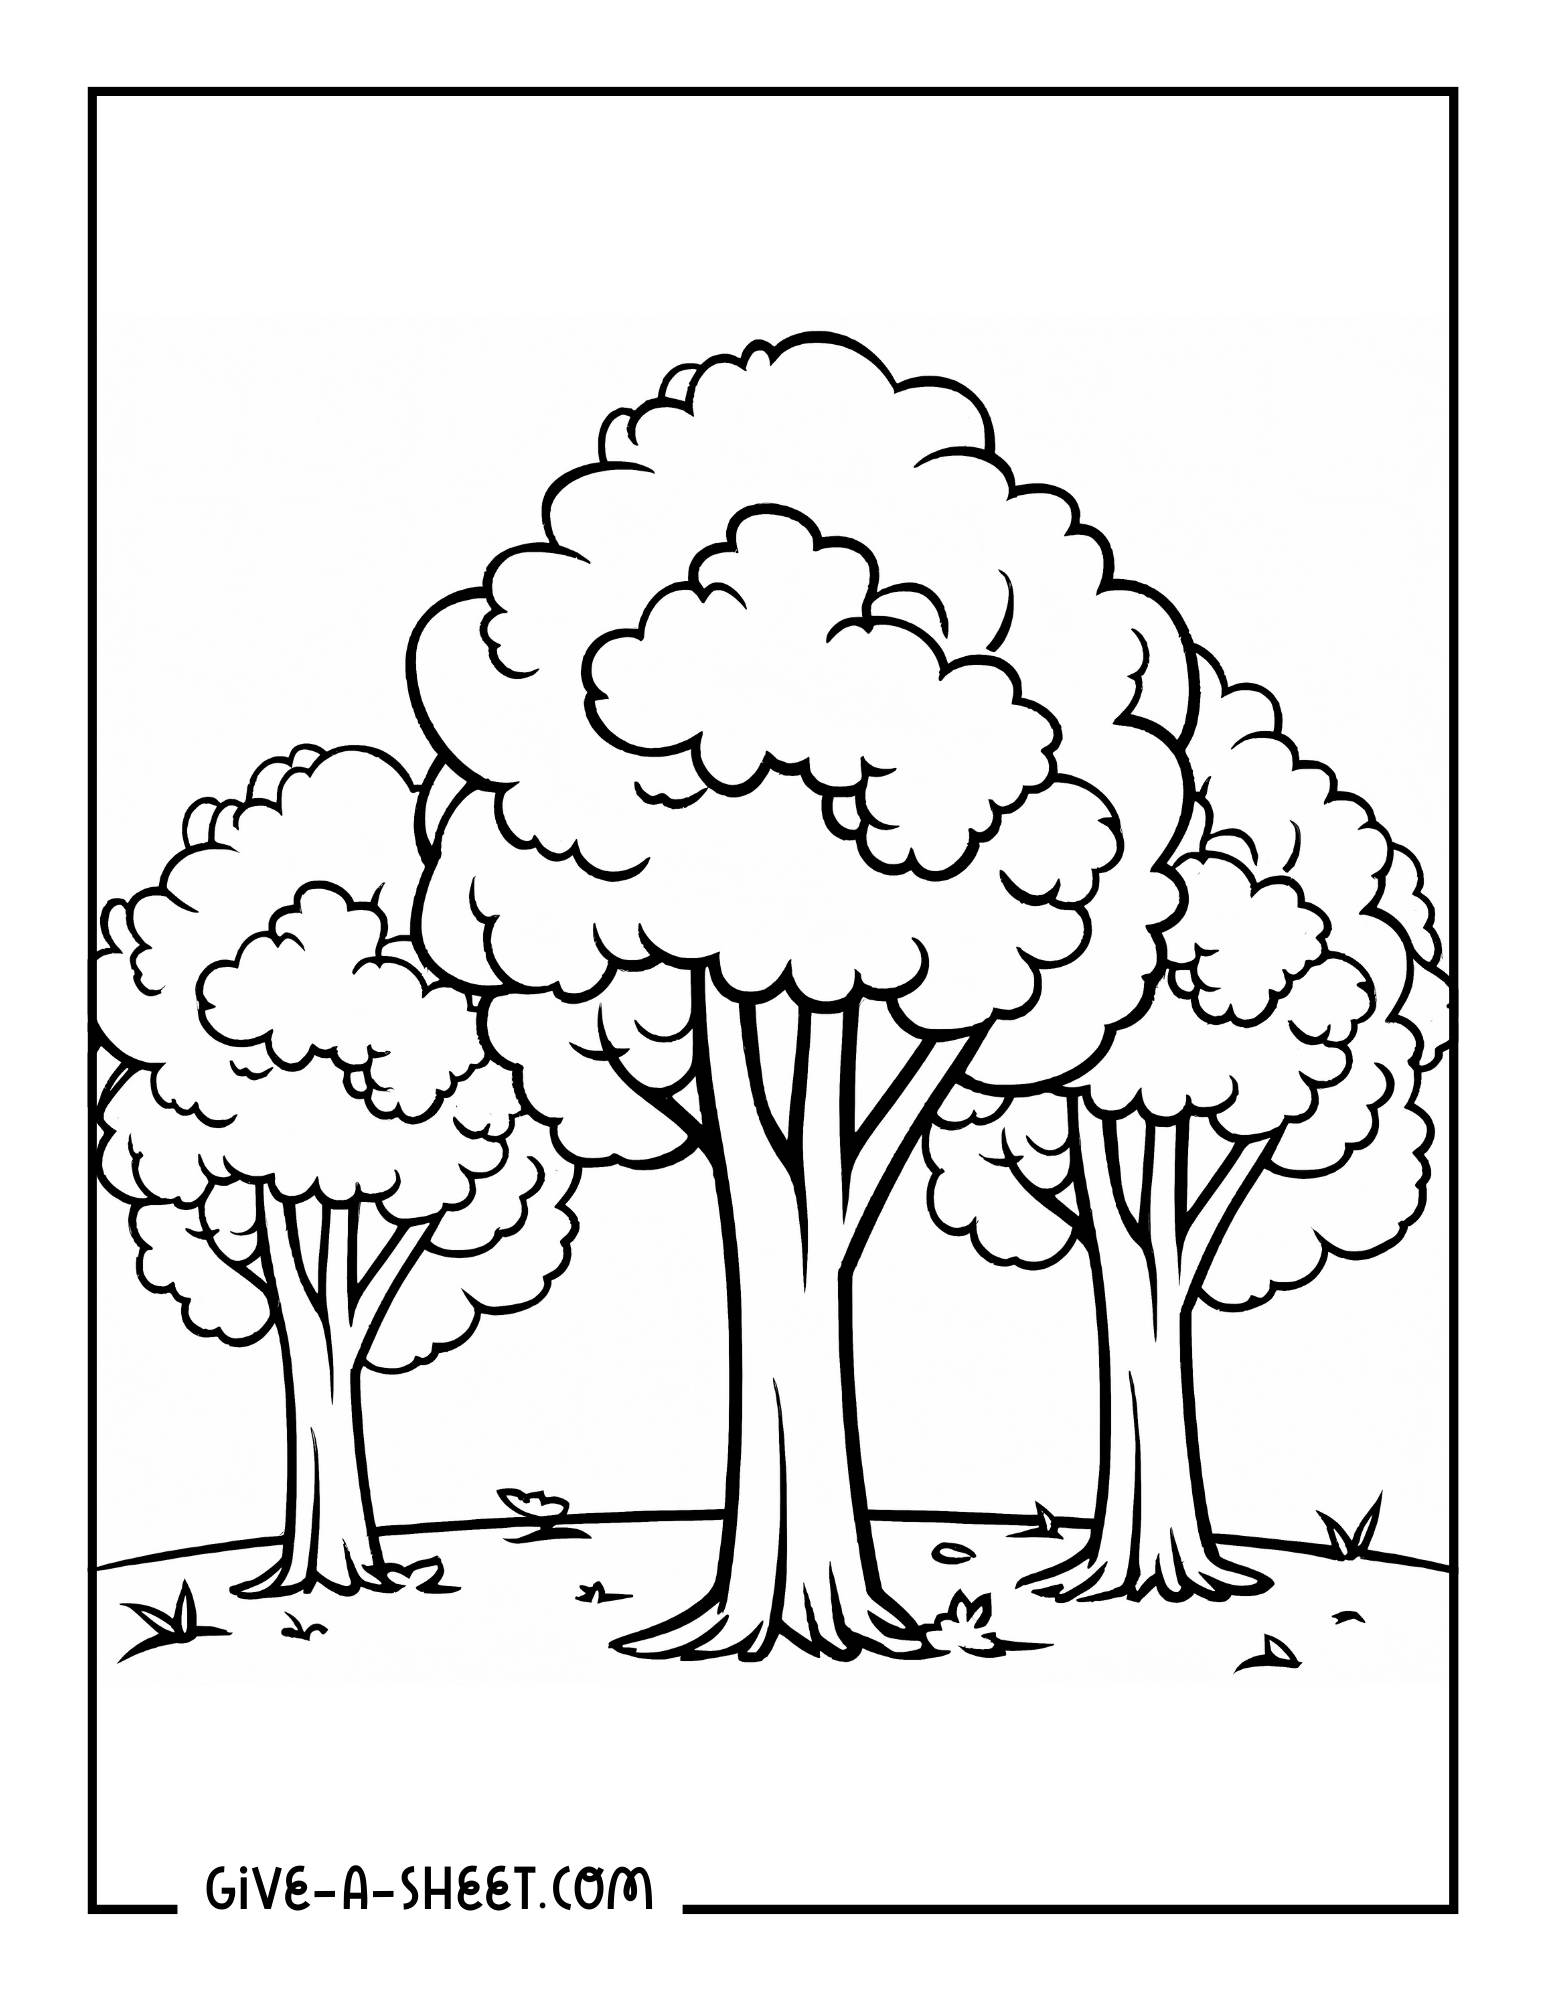 Simple fall tree coloring page for kids.